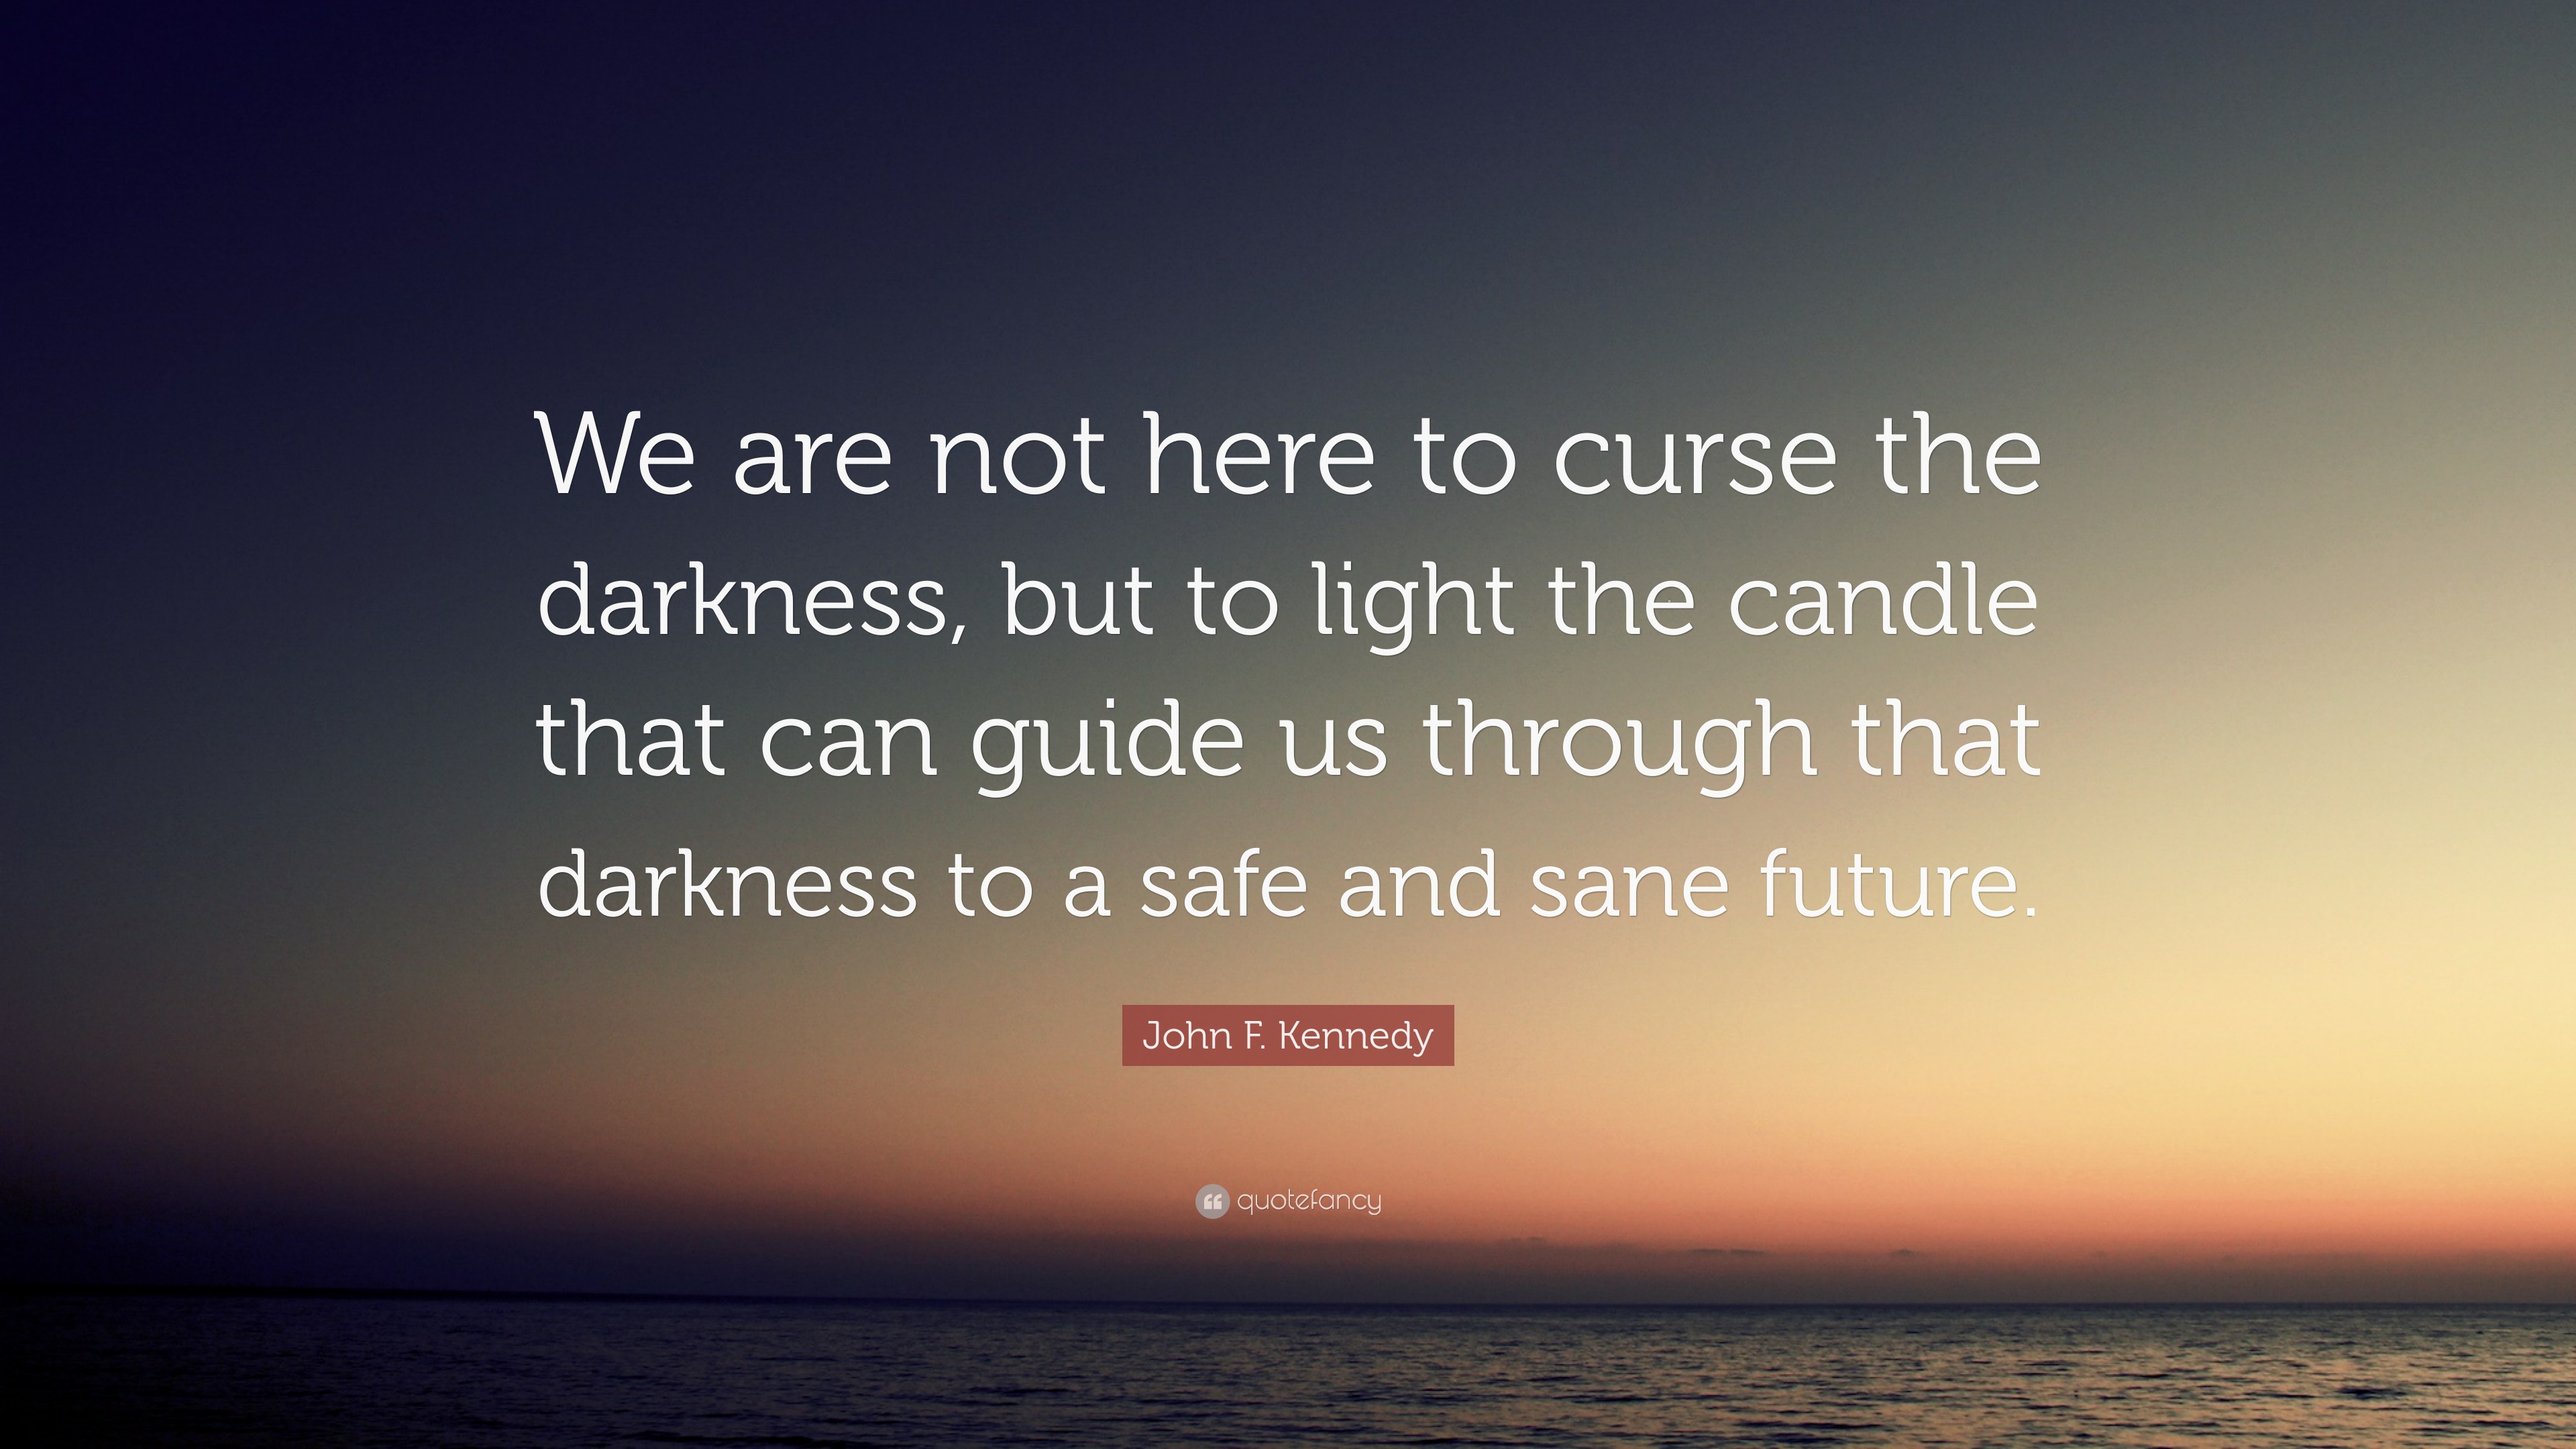 John F. Kennedy Quote: “We are not here to curse the darkness, but to ...